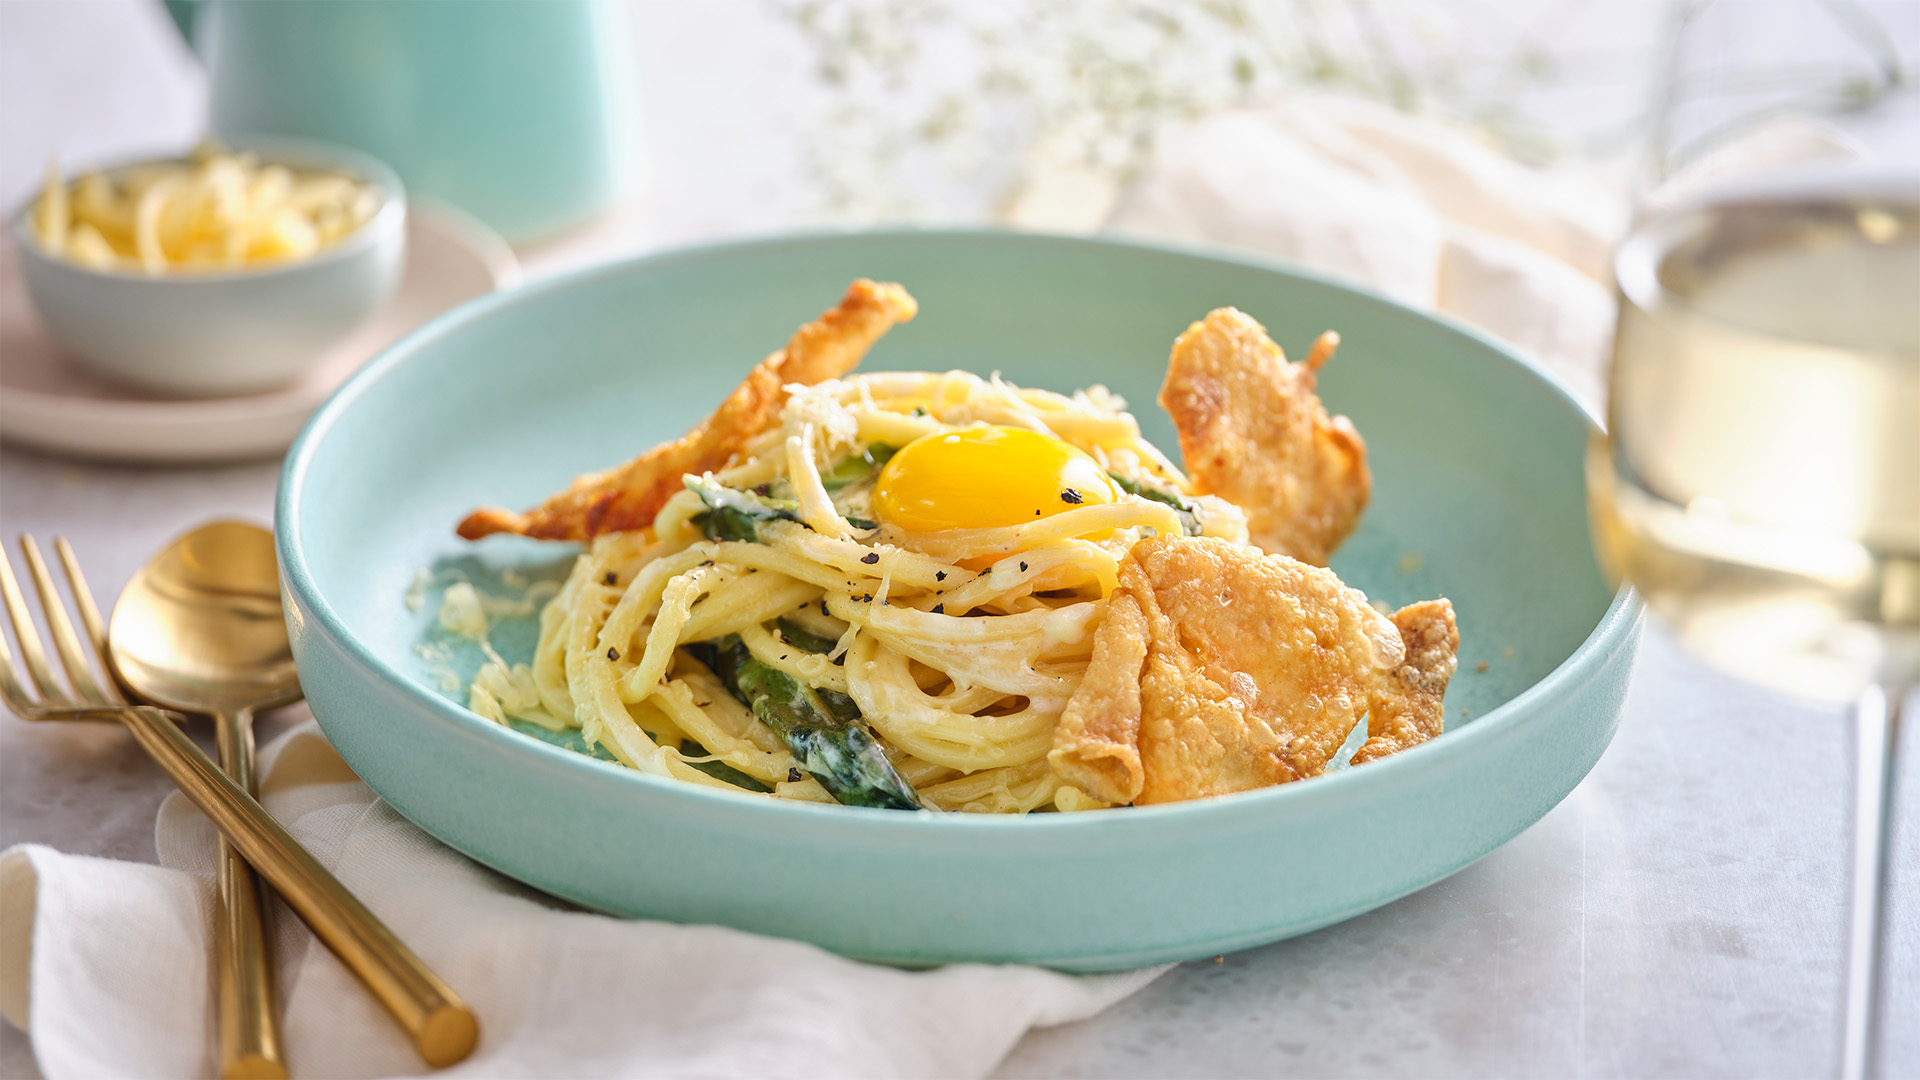 Schmaltz Carbonara with fried chicken skins, and an egg yolk on top in a blue round bowl next to gold colored fork and knife. 